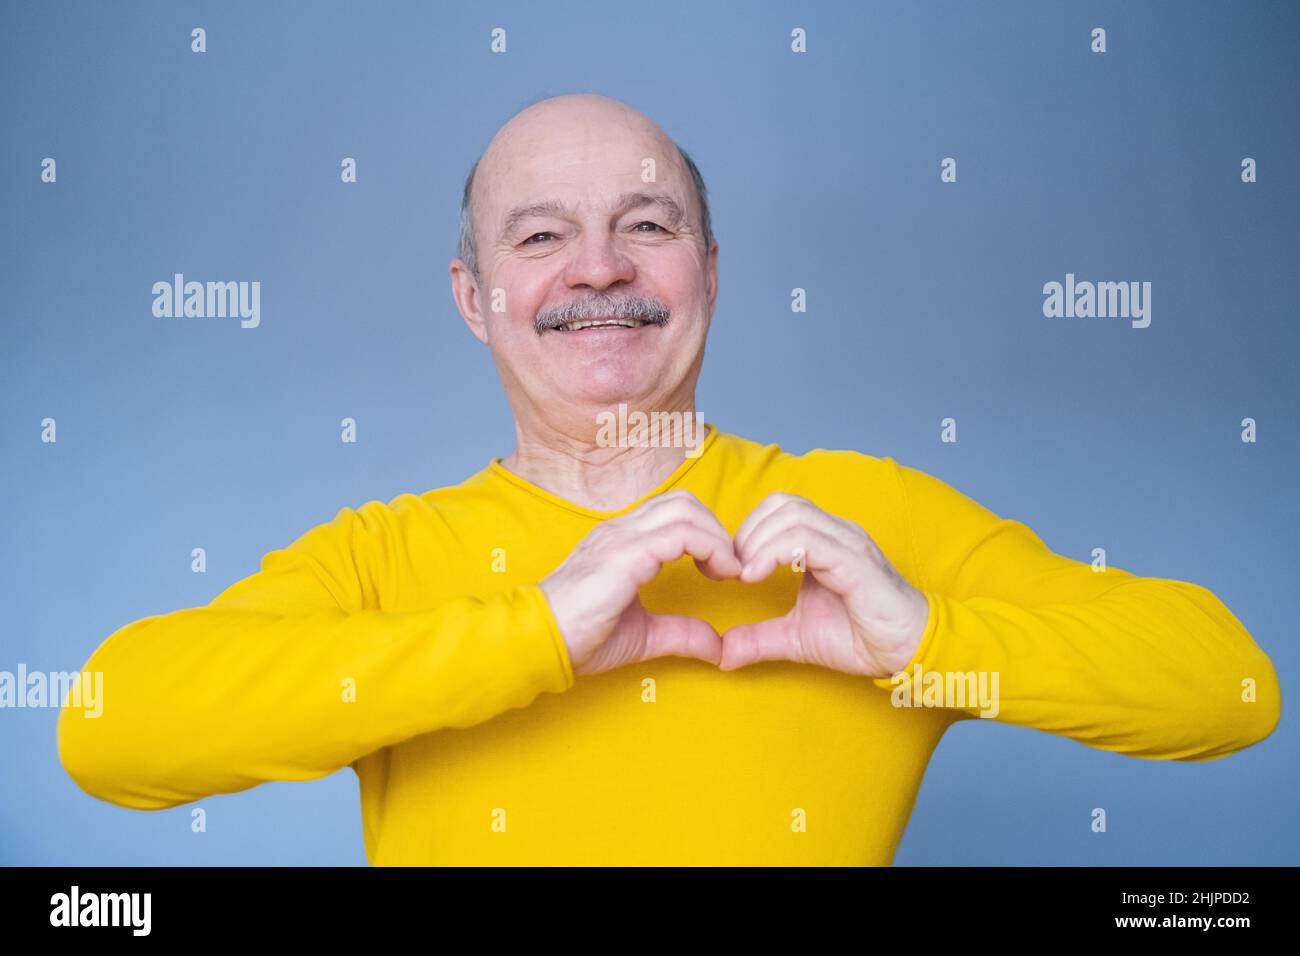 Senior man with smile showing heart symbol with his hands. Health concept. Stock Photo